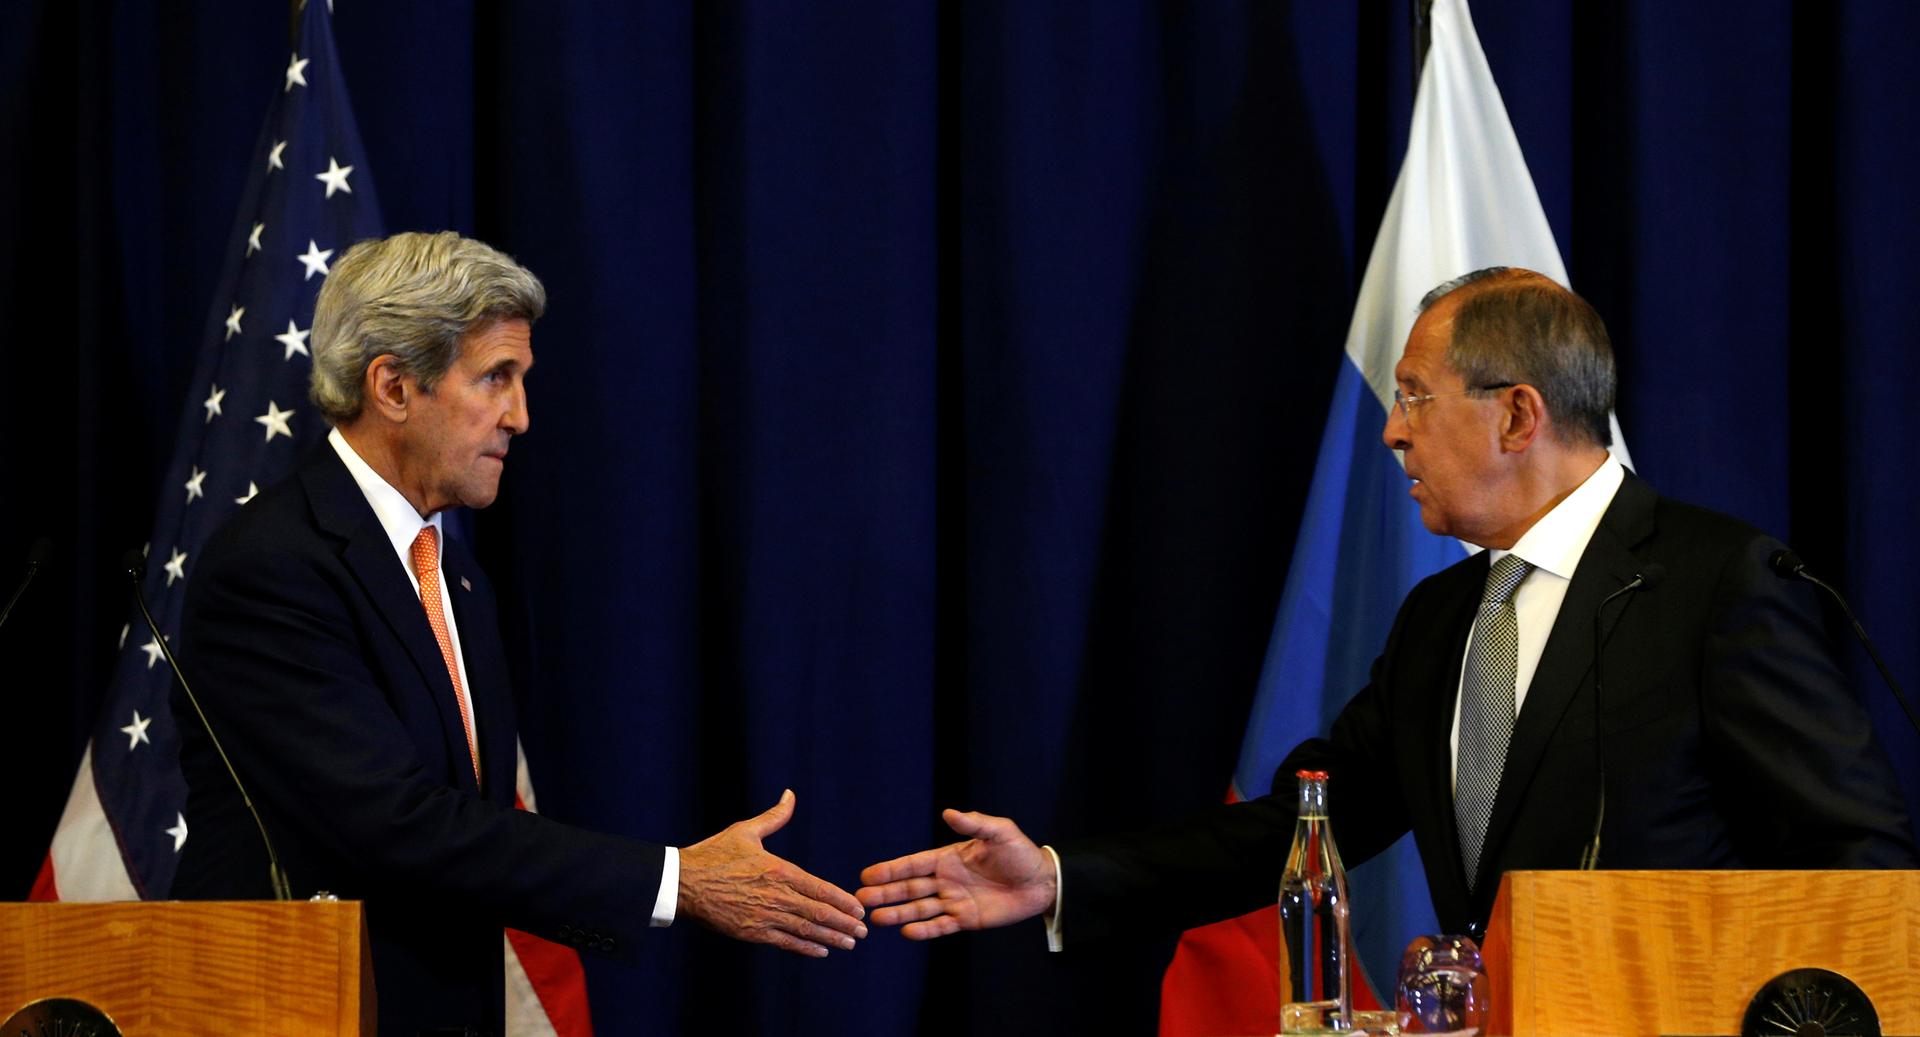 Secretary of State, John Kerry, and Russian Foreign Minister, Sergei Lavrov (R), shake hands after a meeting in Geneva, Switzerland, where they formulated a new ceasefire plan for Syria